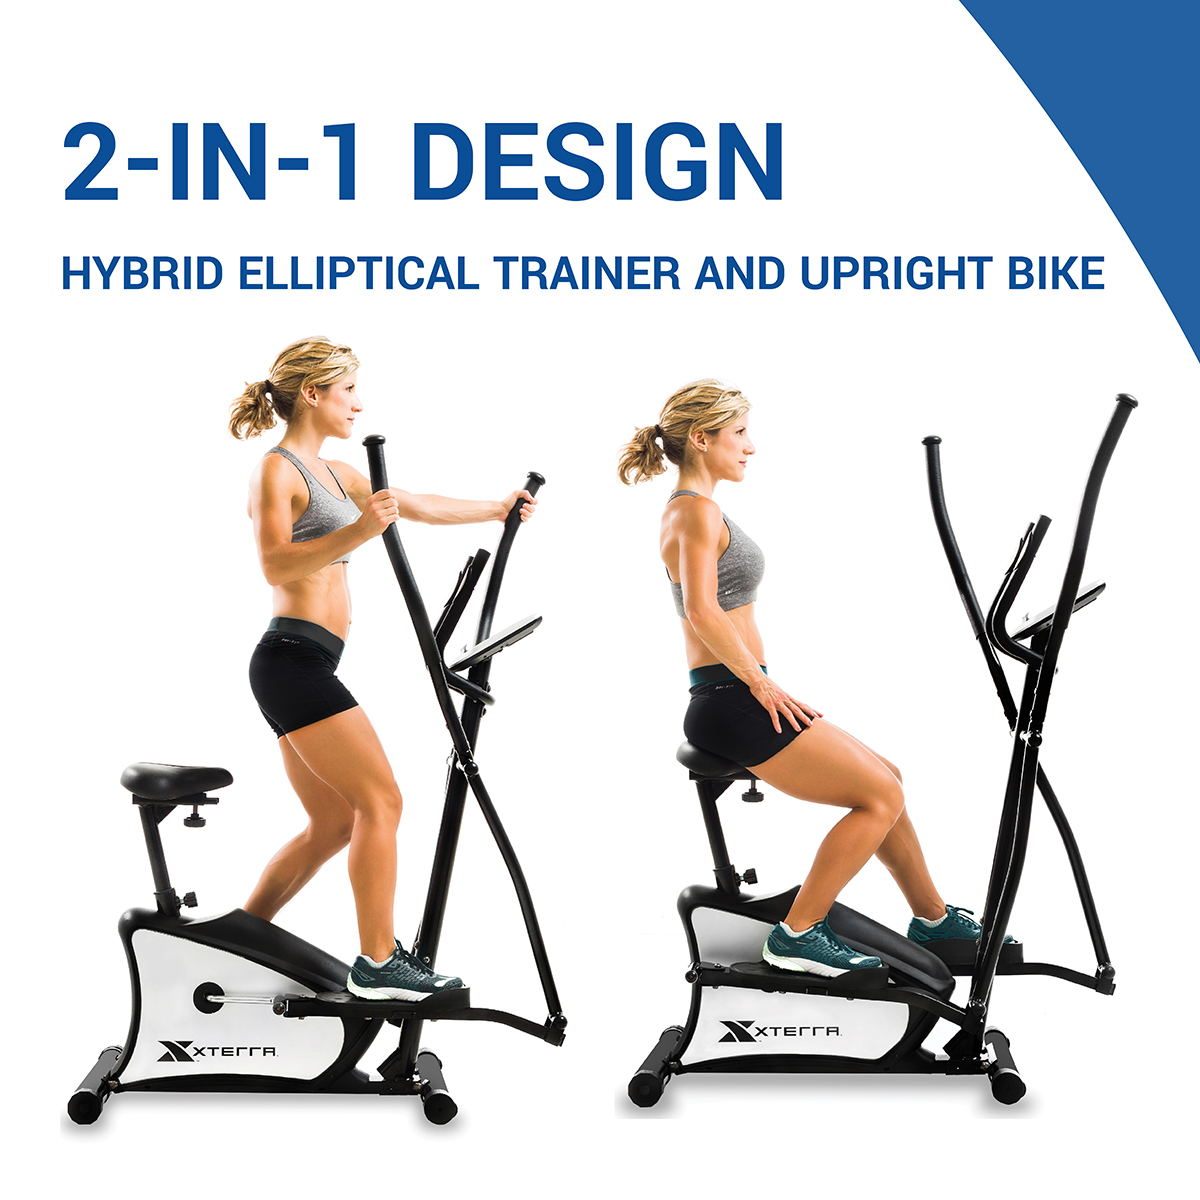 EU150 2-in-1 Hybrid Elliptical Upright Bike for Full Body Workout with 13" Stride, 265 lb Weight Limit - image 4 of 10